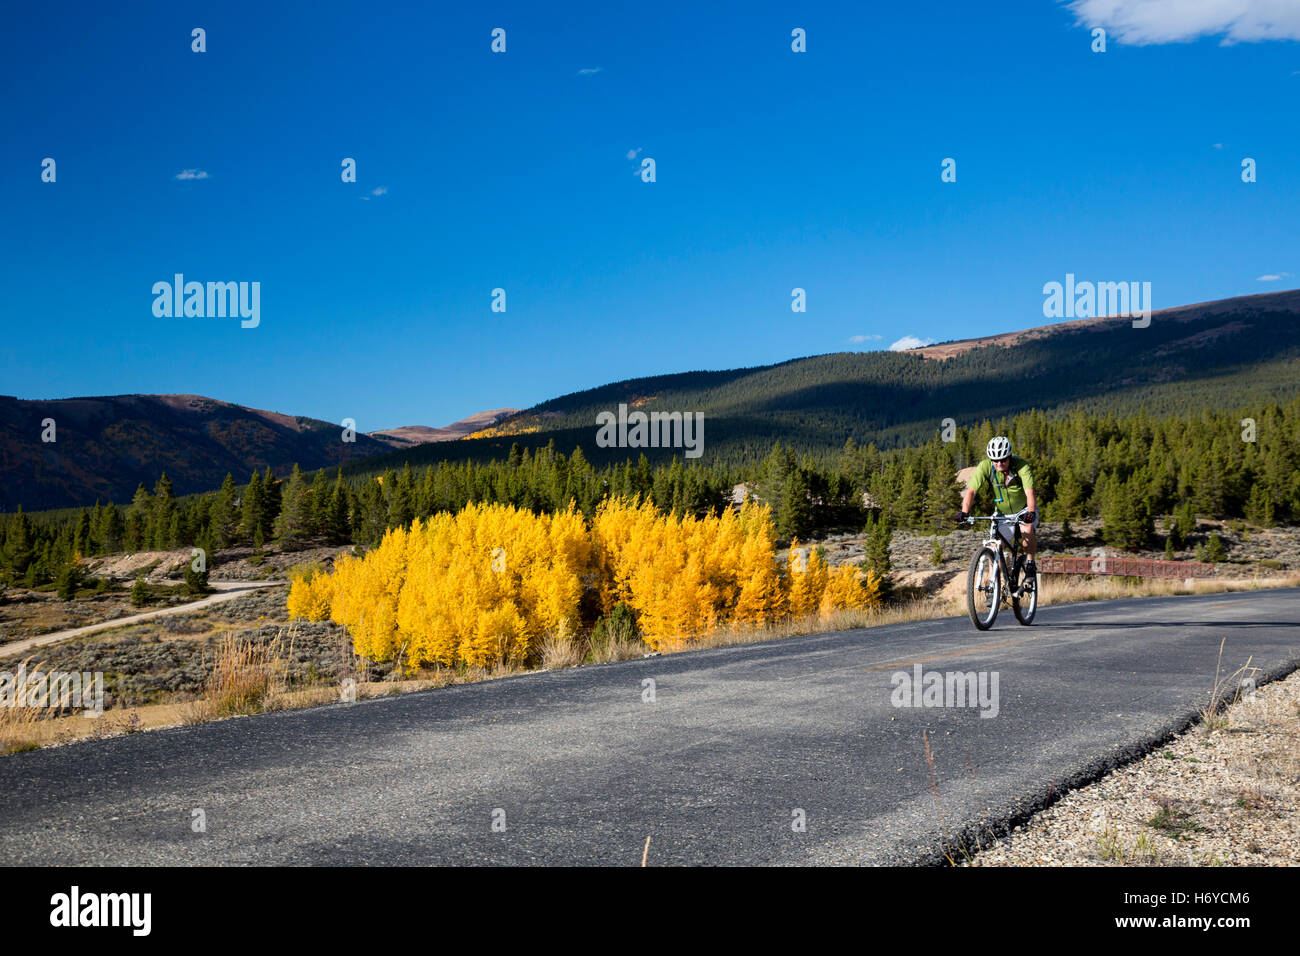 Leadville, Colorado - A bicycle rider on the Mineral Belt Trail, an 11.6 mile non-motorized trail that loops around Leadville. Stock Photo